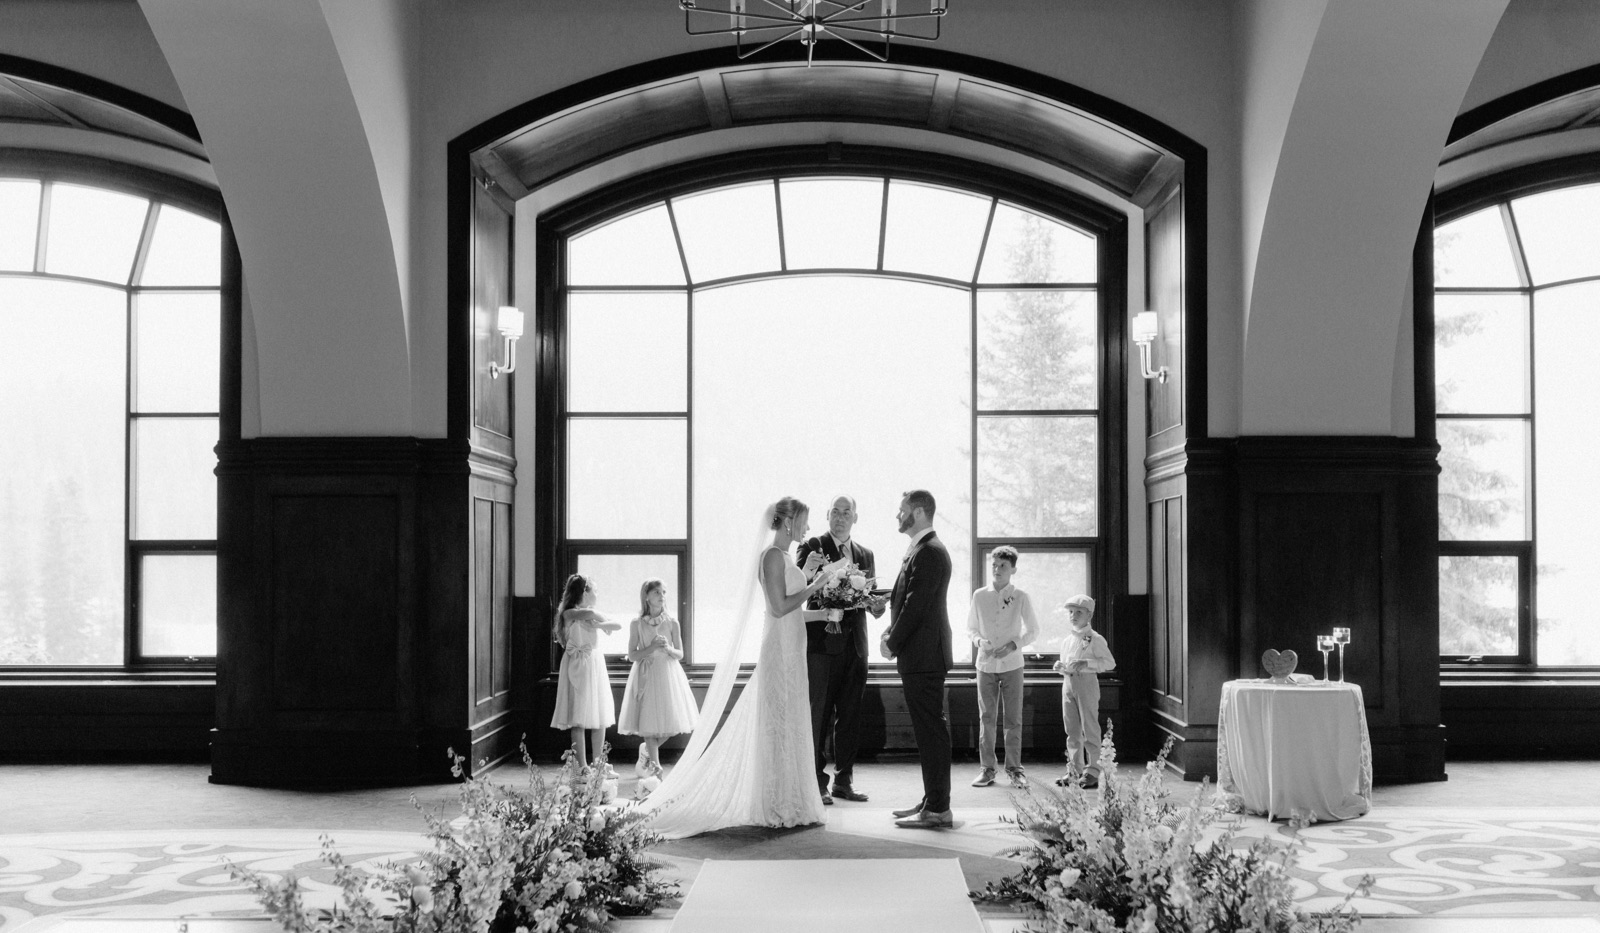 Timeless wedding ceremony with kids as wedding party in the Victoria Ballroom